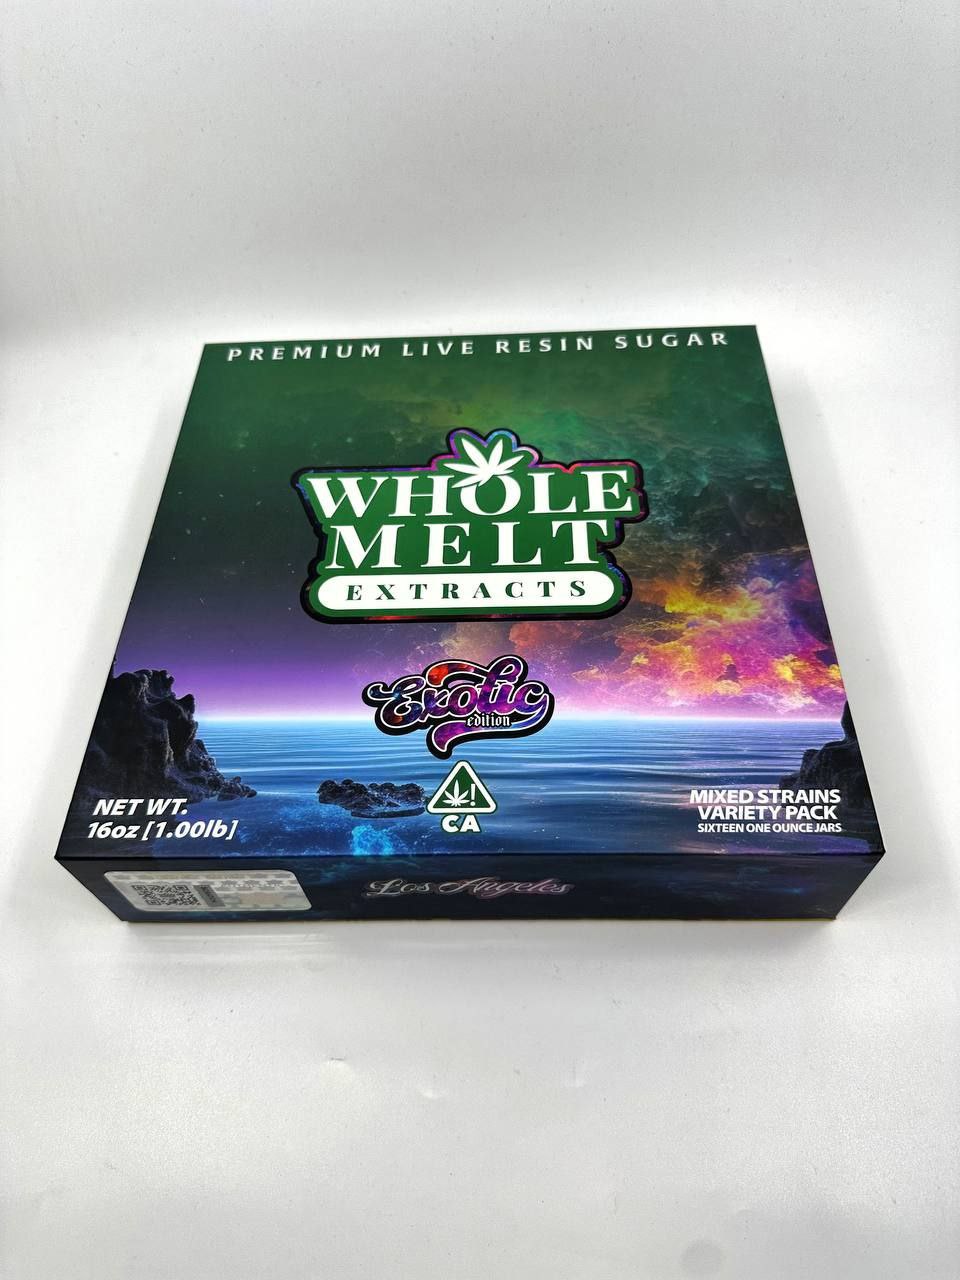 Image of a box for "Import placeholder for 70," featuring live resin sugar. The colorful design on the box includes text and graphics against a vibrant background showcasing a scenic night sky and ocean. The box indicates a net weight of 16 oz and a mix of strains in the variety pack.